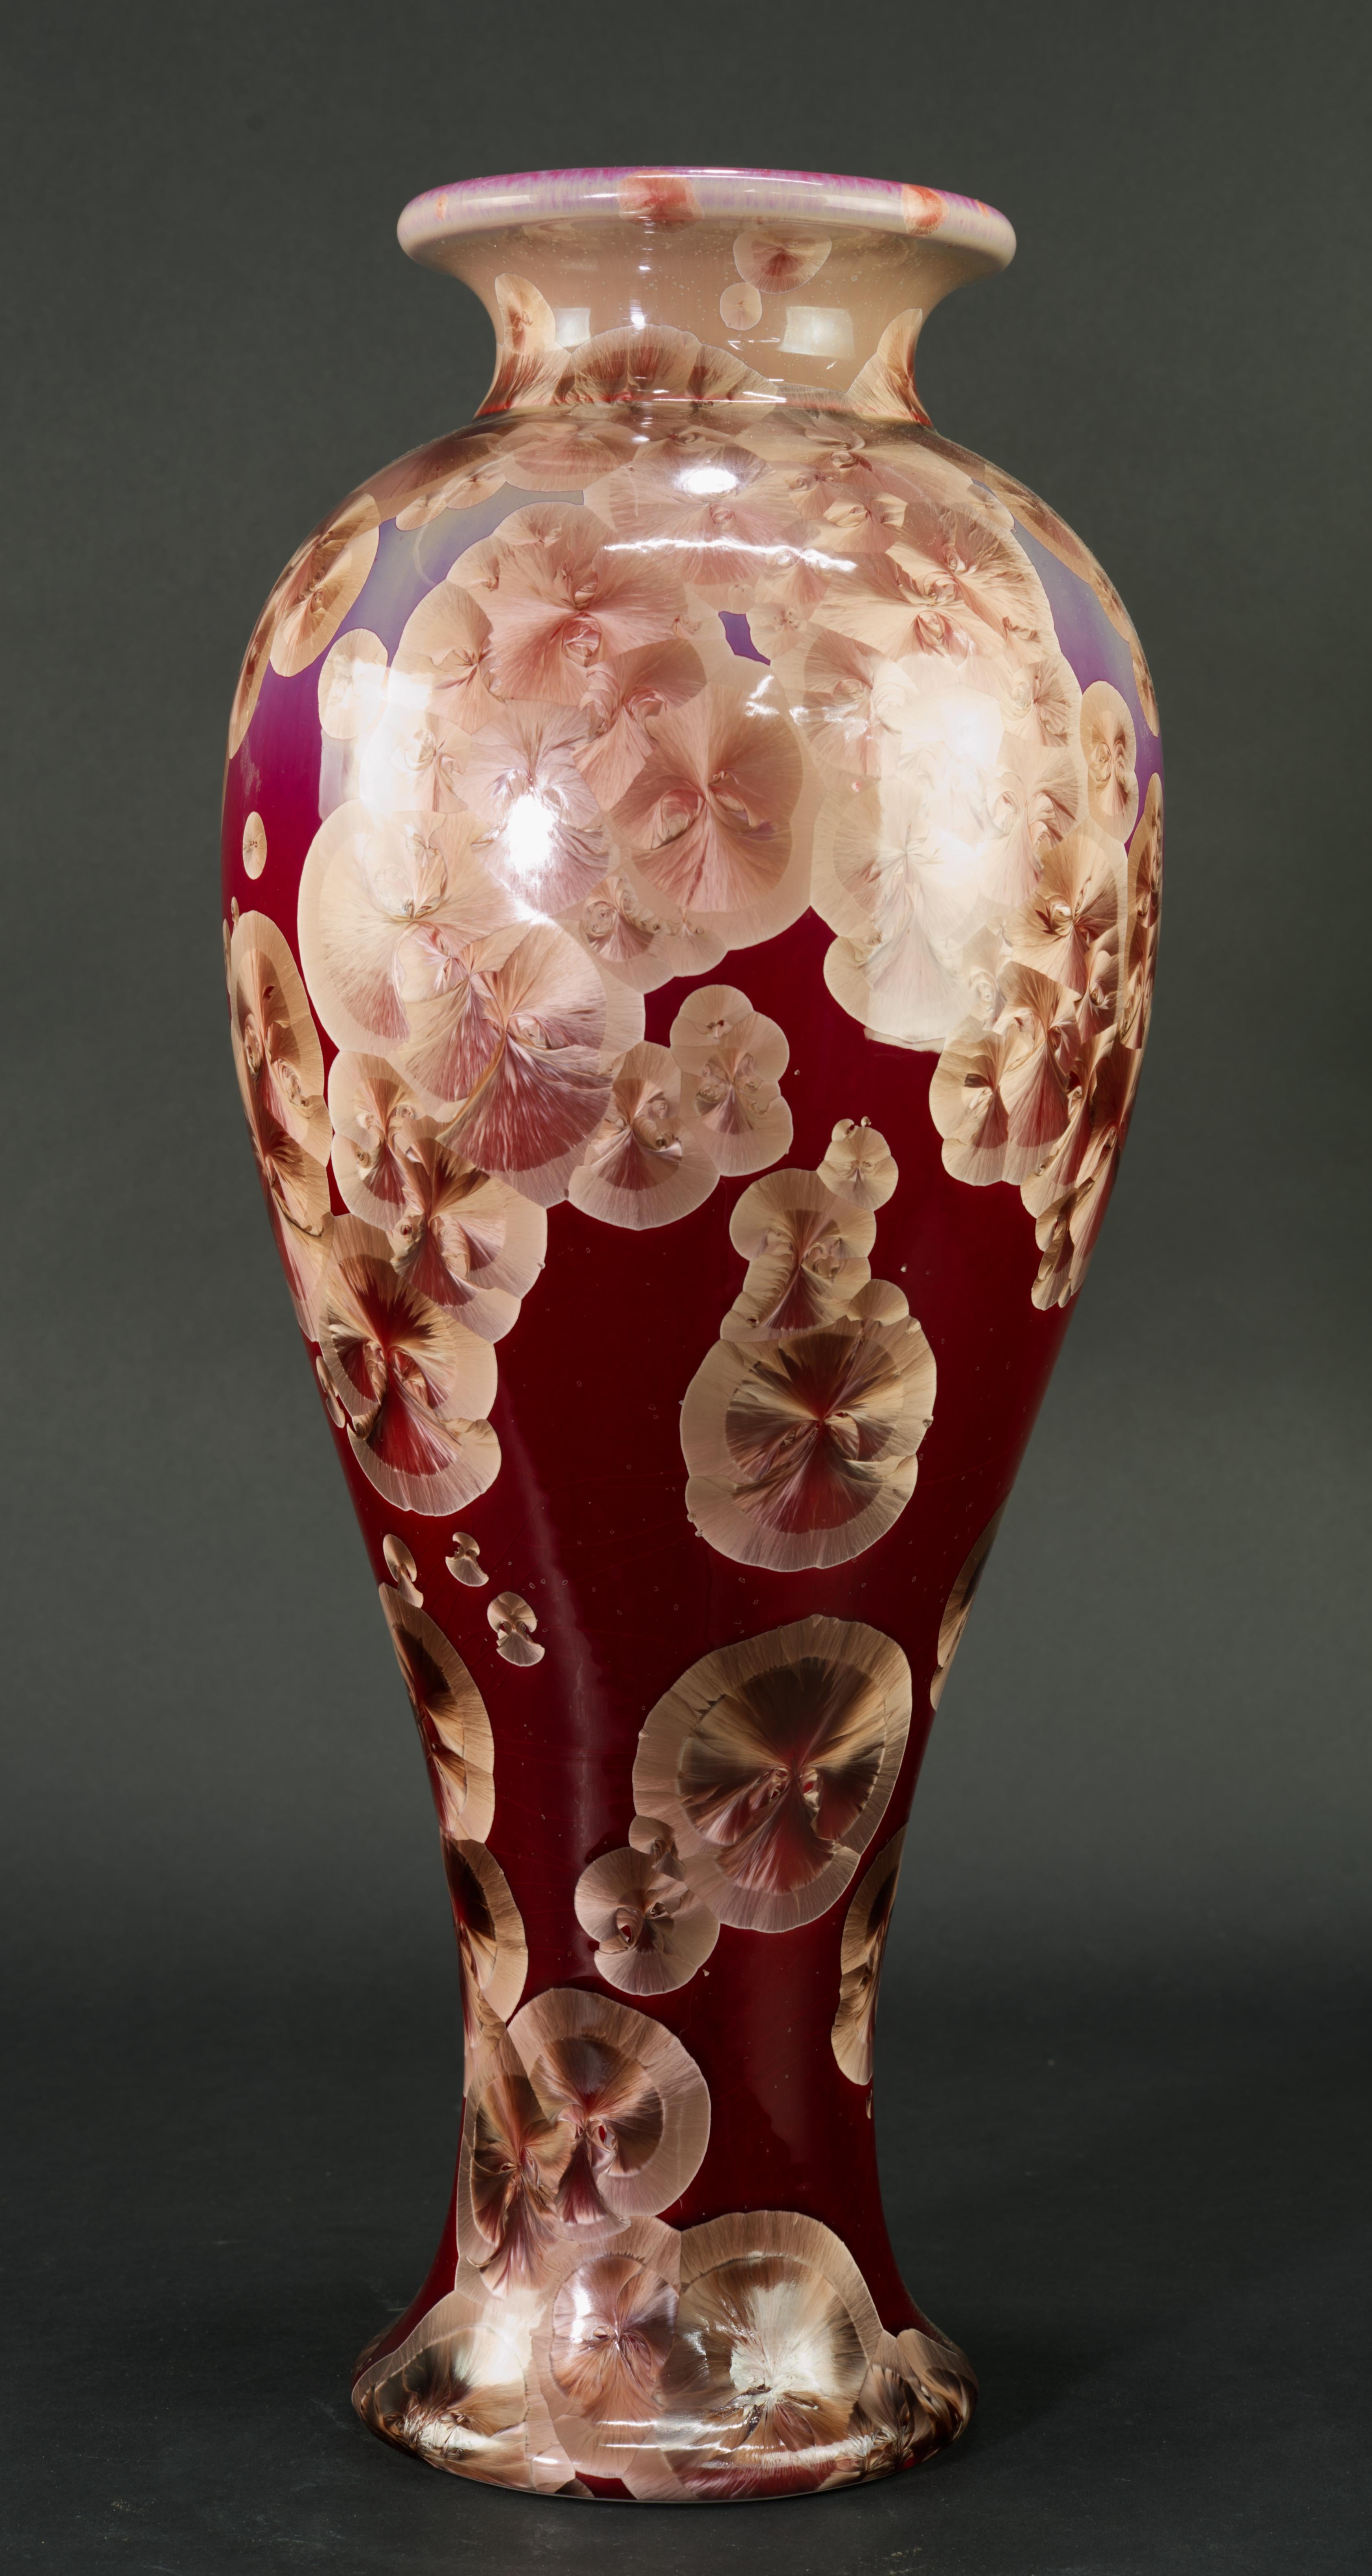 
The monumental studio pottery ceramic vase is decorated with crystalline glaze in striking, dark red and beige palette. The vase was hand thrown on a wheel; beige color crystals on ombre colored base, shifting from purplish tones on top to deep,